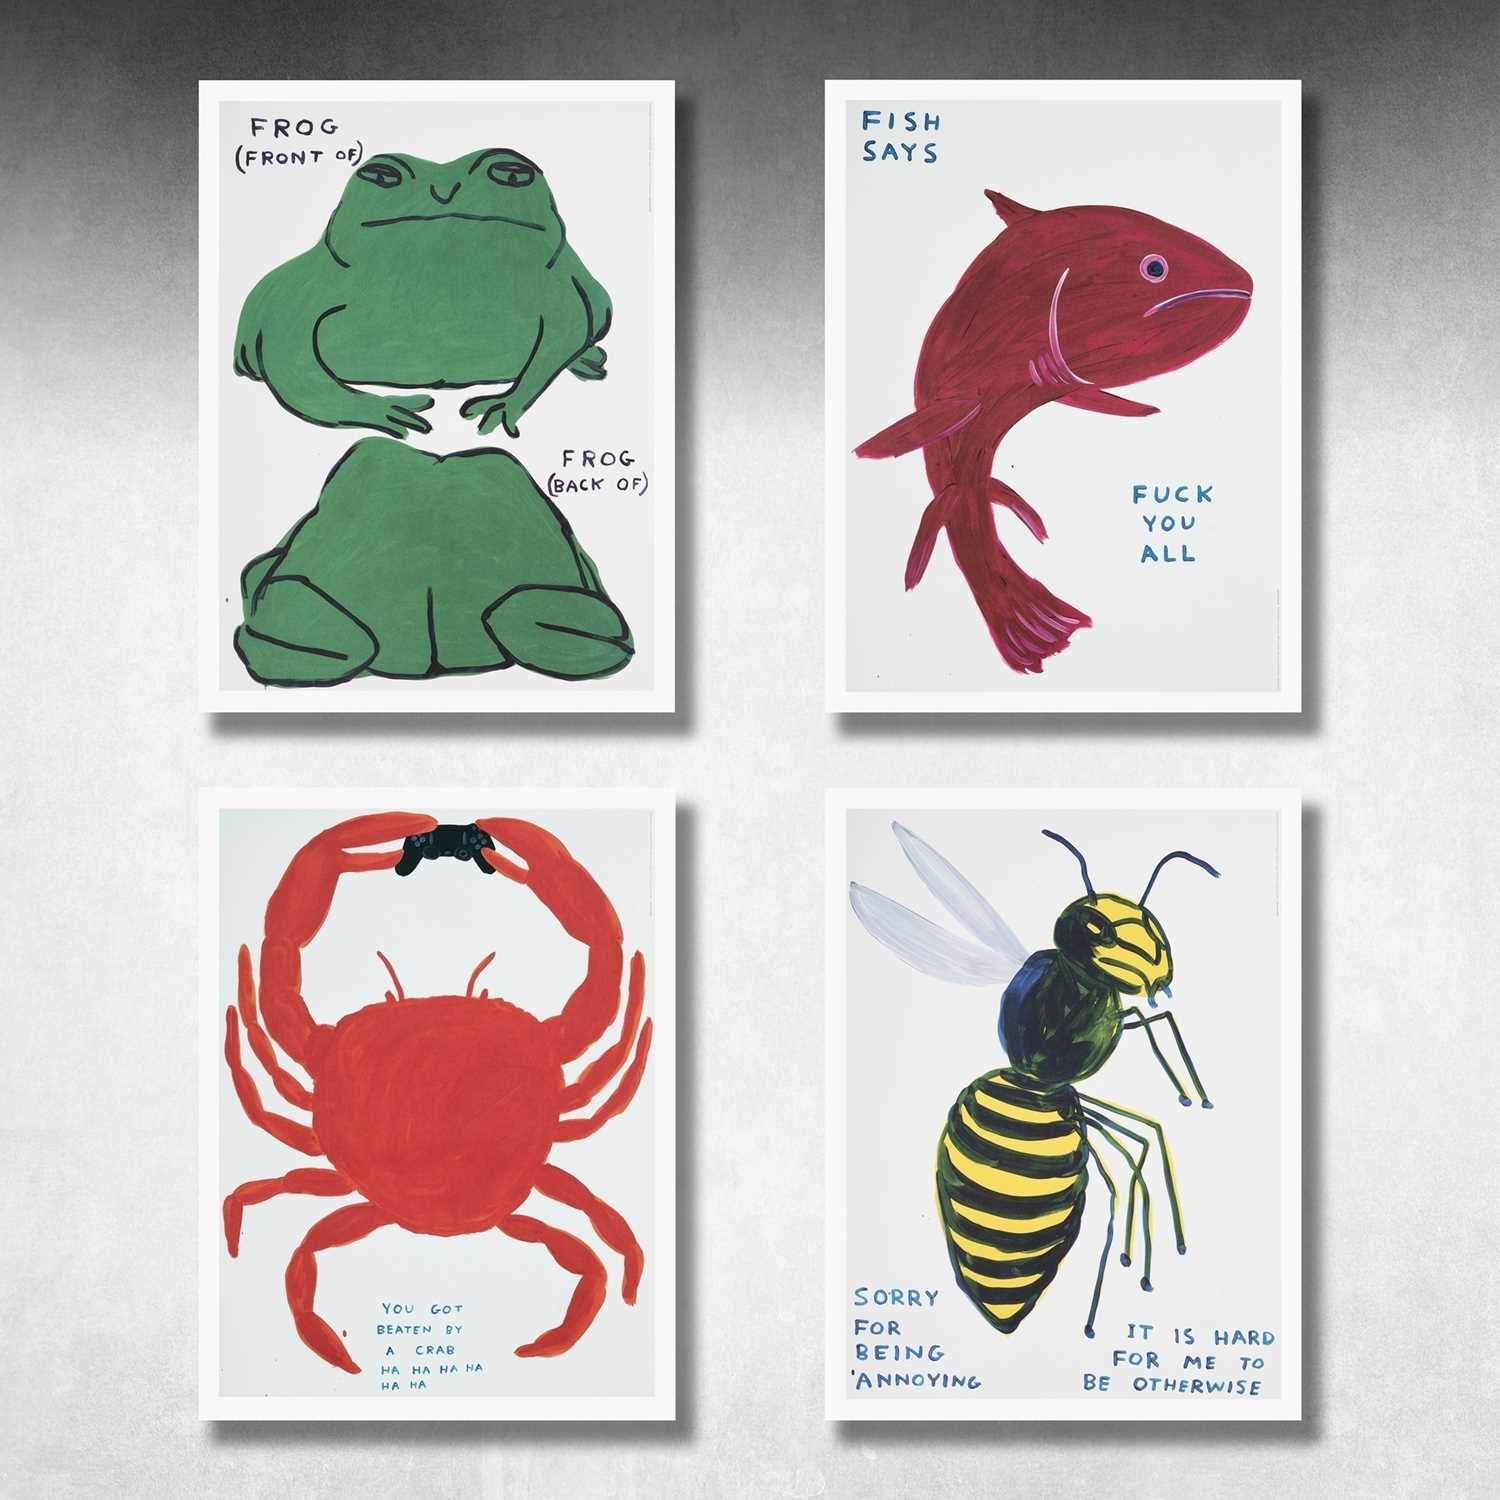 Lot 31 - David Shrigley (British 1968-), 'Fish Says Fuck You All, Frog (Front Of) Frog (Back Of), Sorry For Being Annoying & You Got Beaten By A Crab', 2022